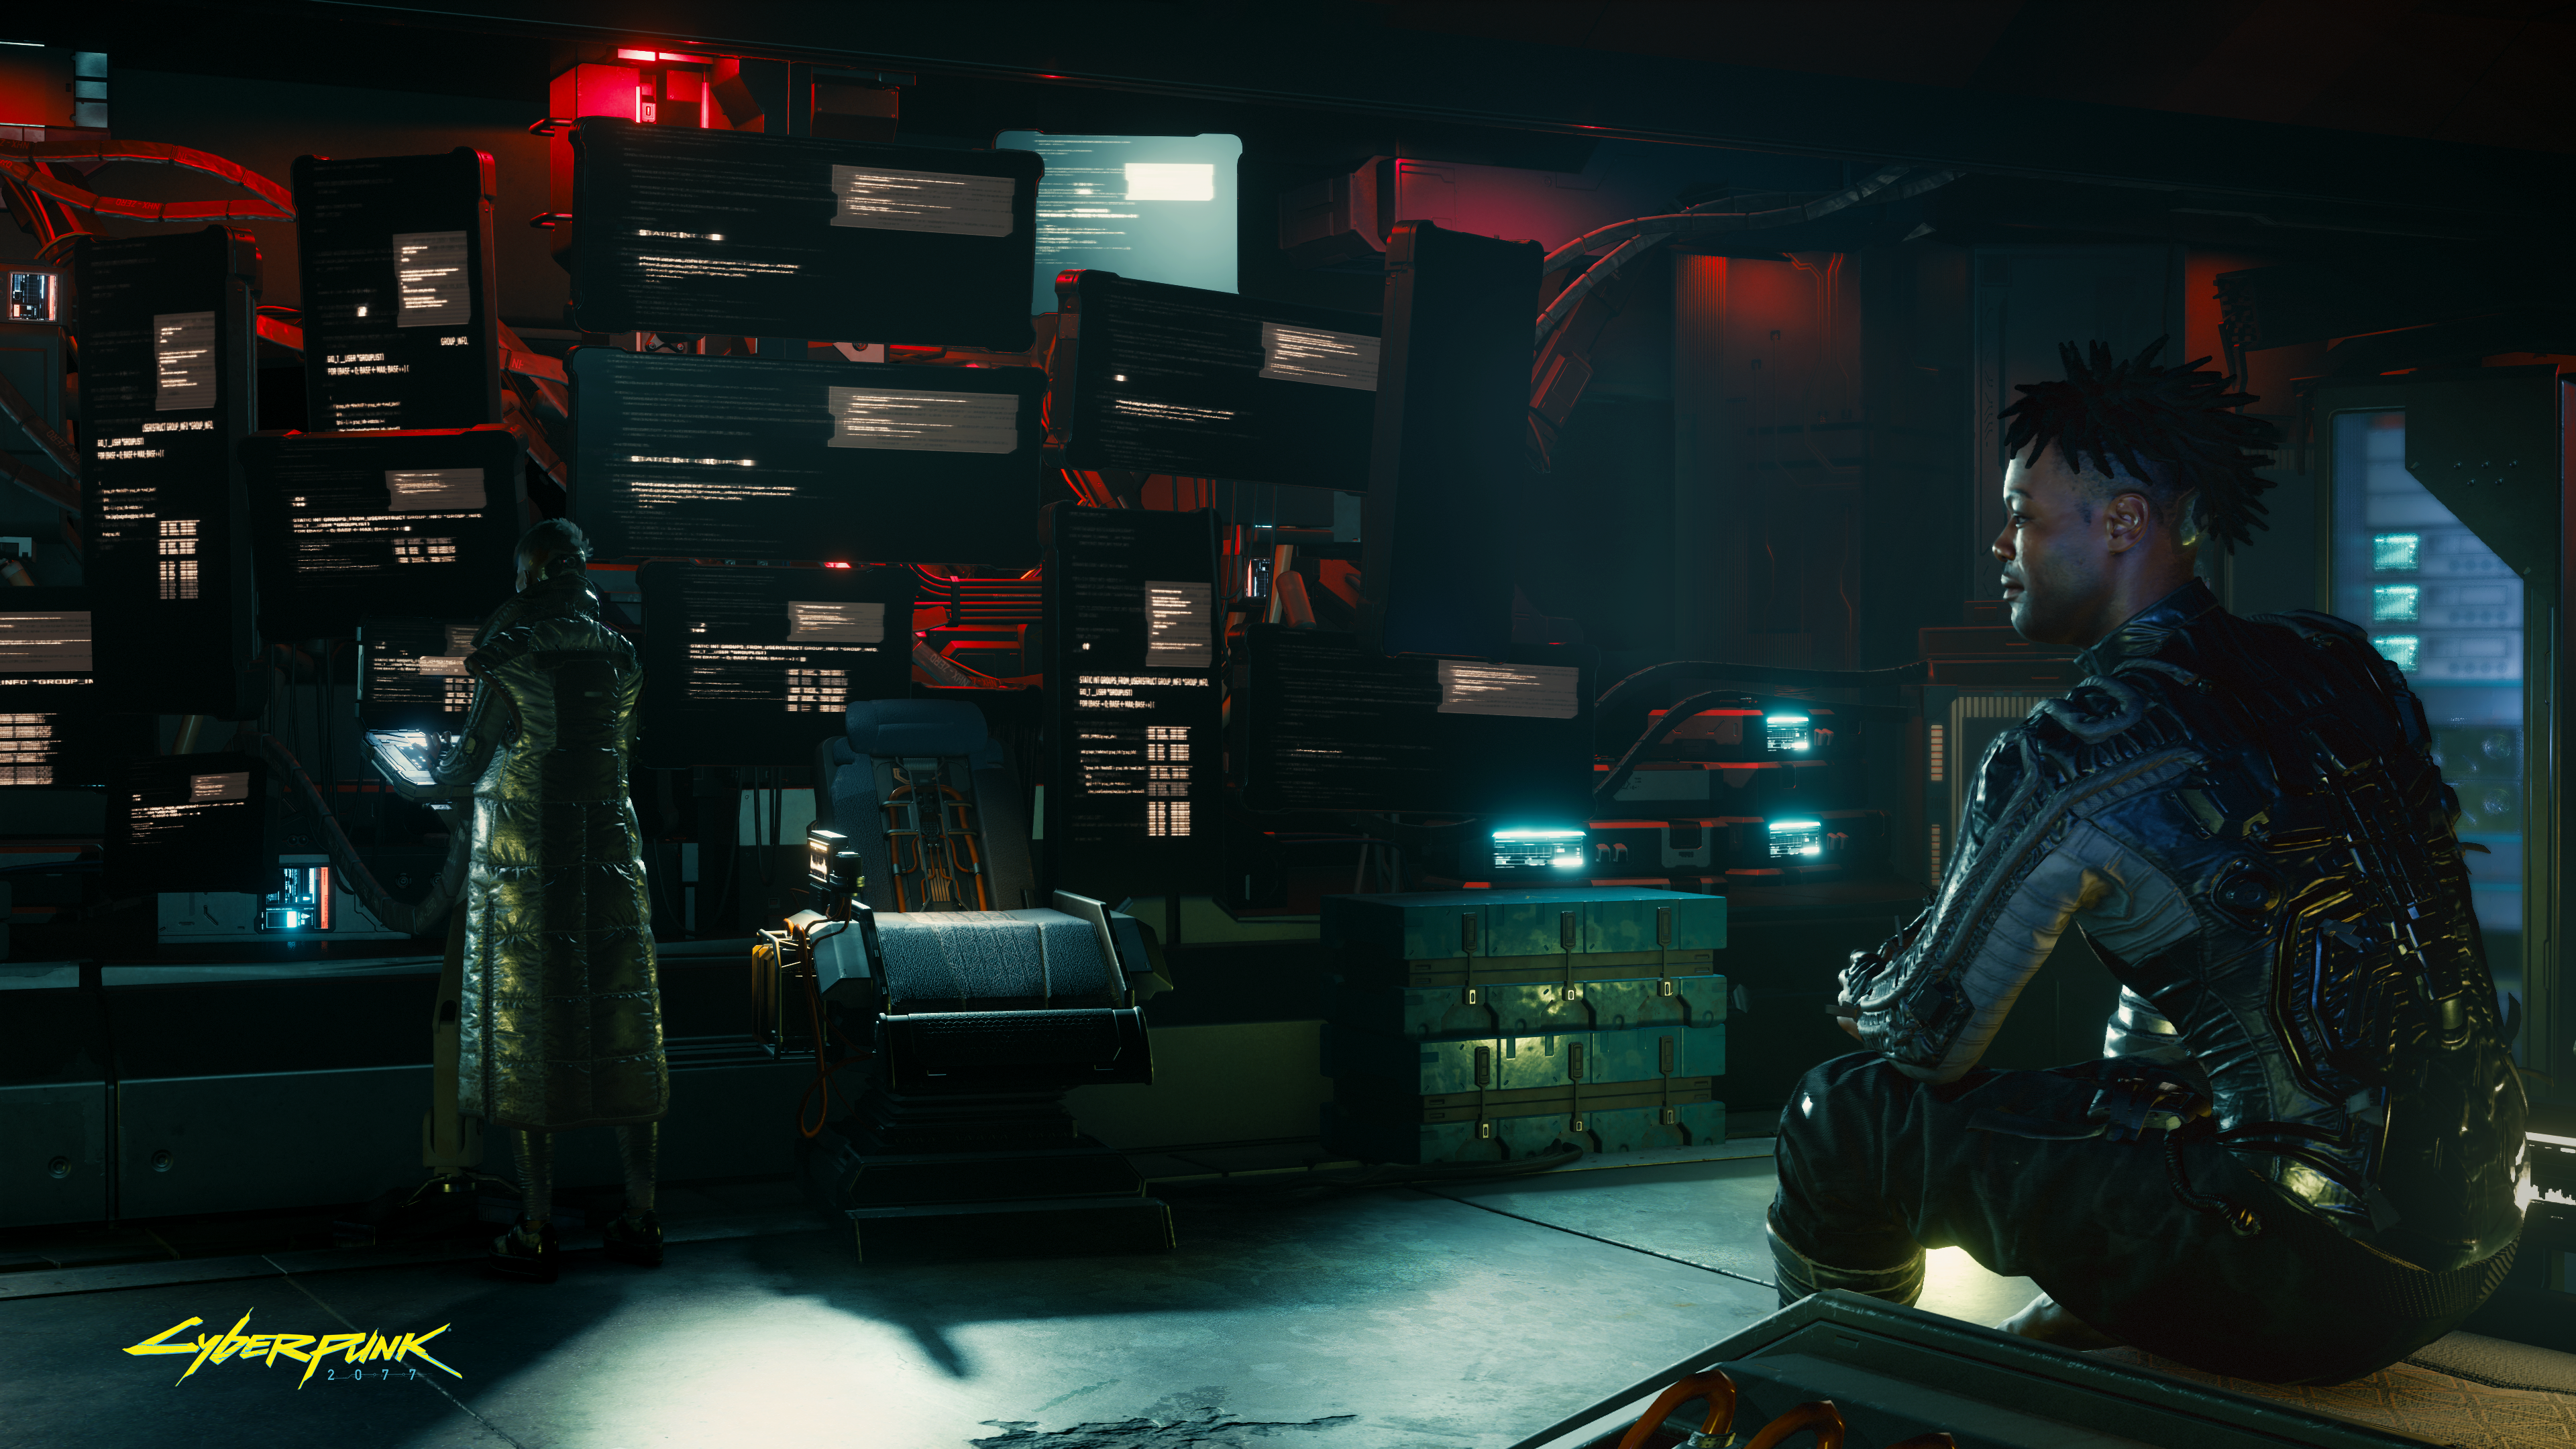 Media asset in full size related to 3dfxzone.it news item entitled as follows: NVIDIA pubblica nuovi screenshots 4K di Cyberpunk 2077 con ray-tracing | Image Name: news29734_Cyberpunk-2077-Screenshot_4.png